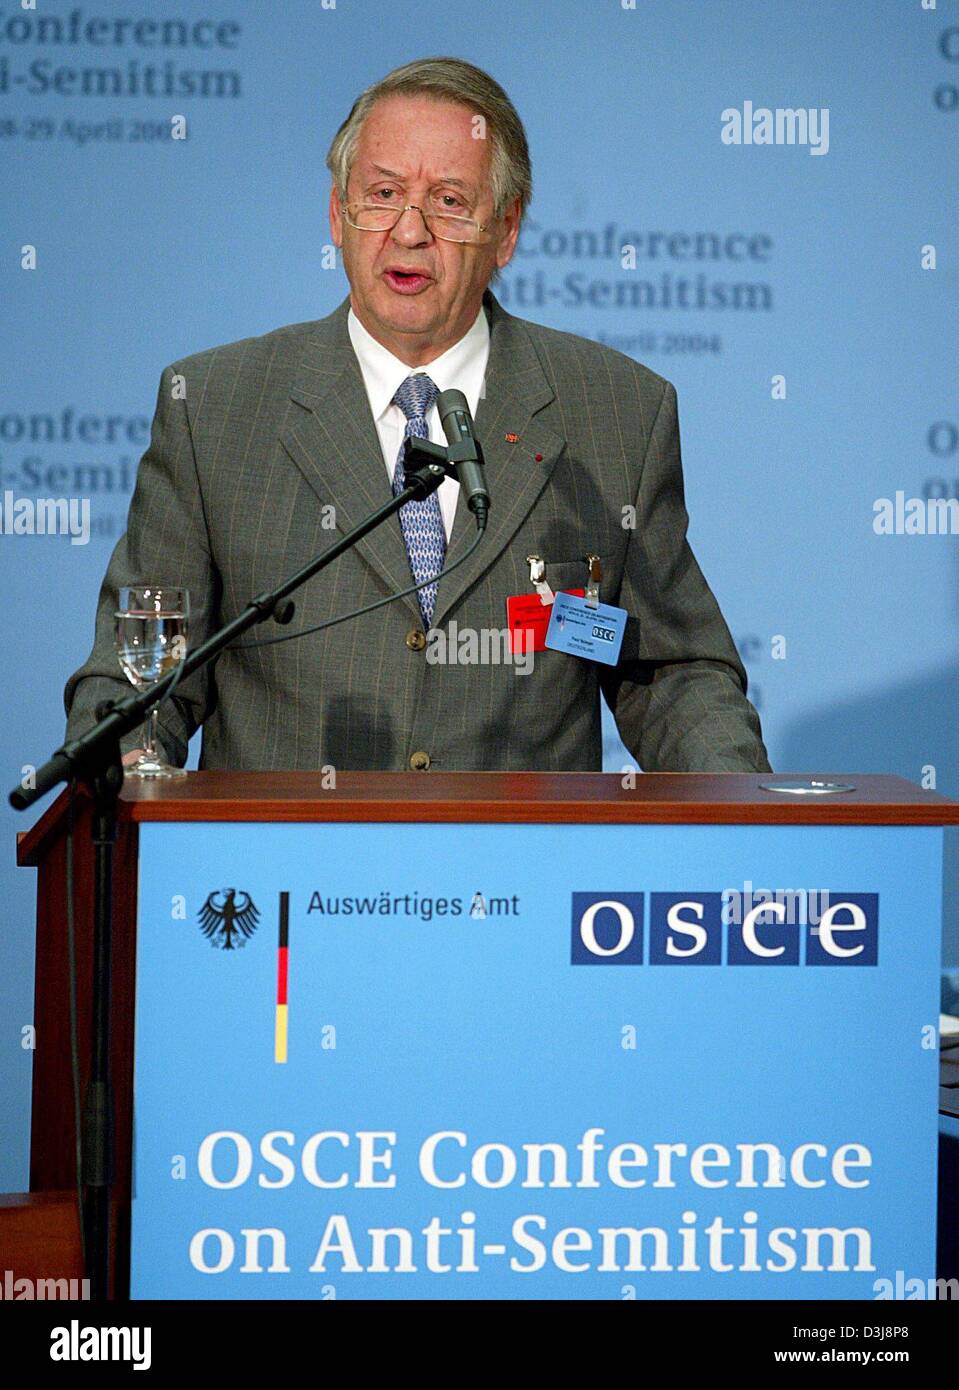 (dpa) - Paul Spiegel, Chairman of the Central Consistory of Jews in Germany, speaks during the international Anti-Semitism conference which is held in cooperation with the Organisation of Security and Cooperation in Europe (OSCE) in Berlin, Germany, on Wednesday 28 April 2004. About 500 participants from almost 60 countries are attending the two-day event which wants to show that t Stock Photo